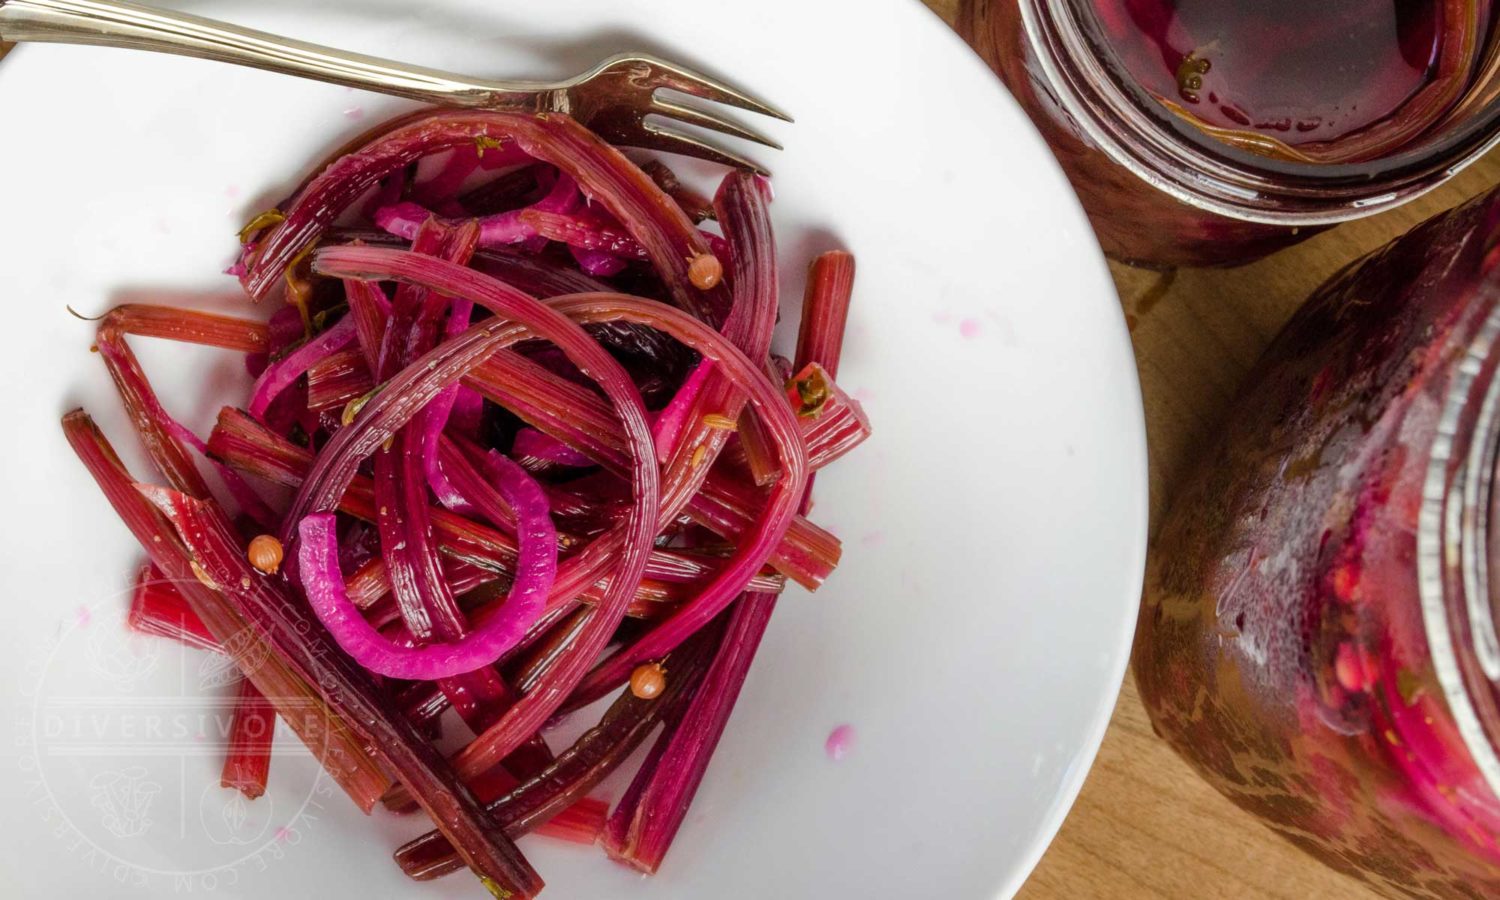 Spicy Pickled Beet stems